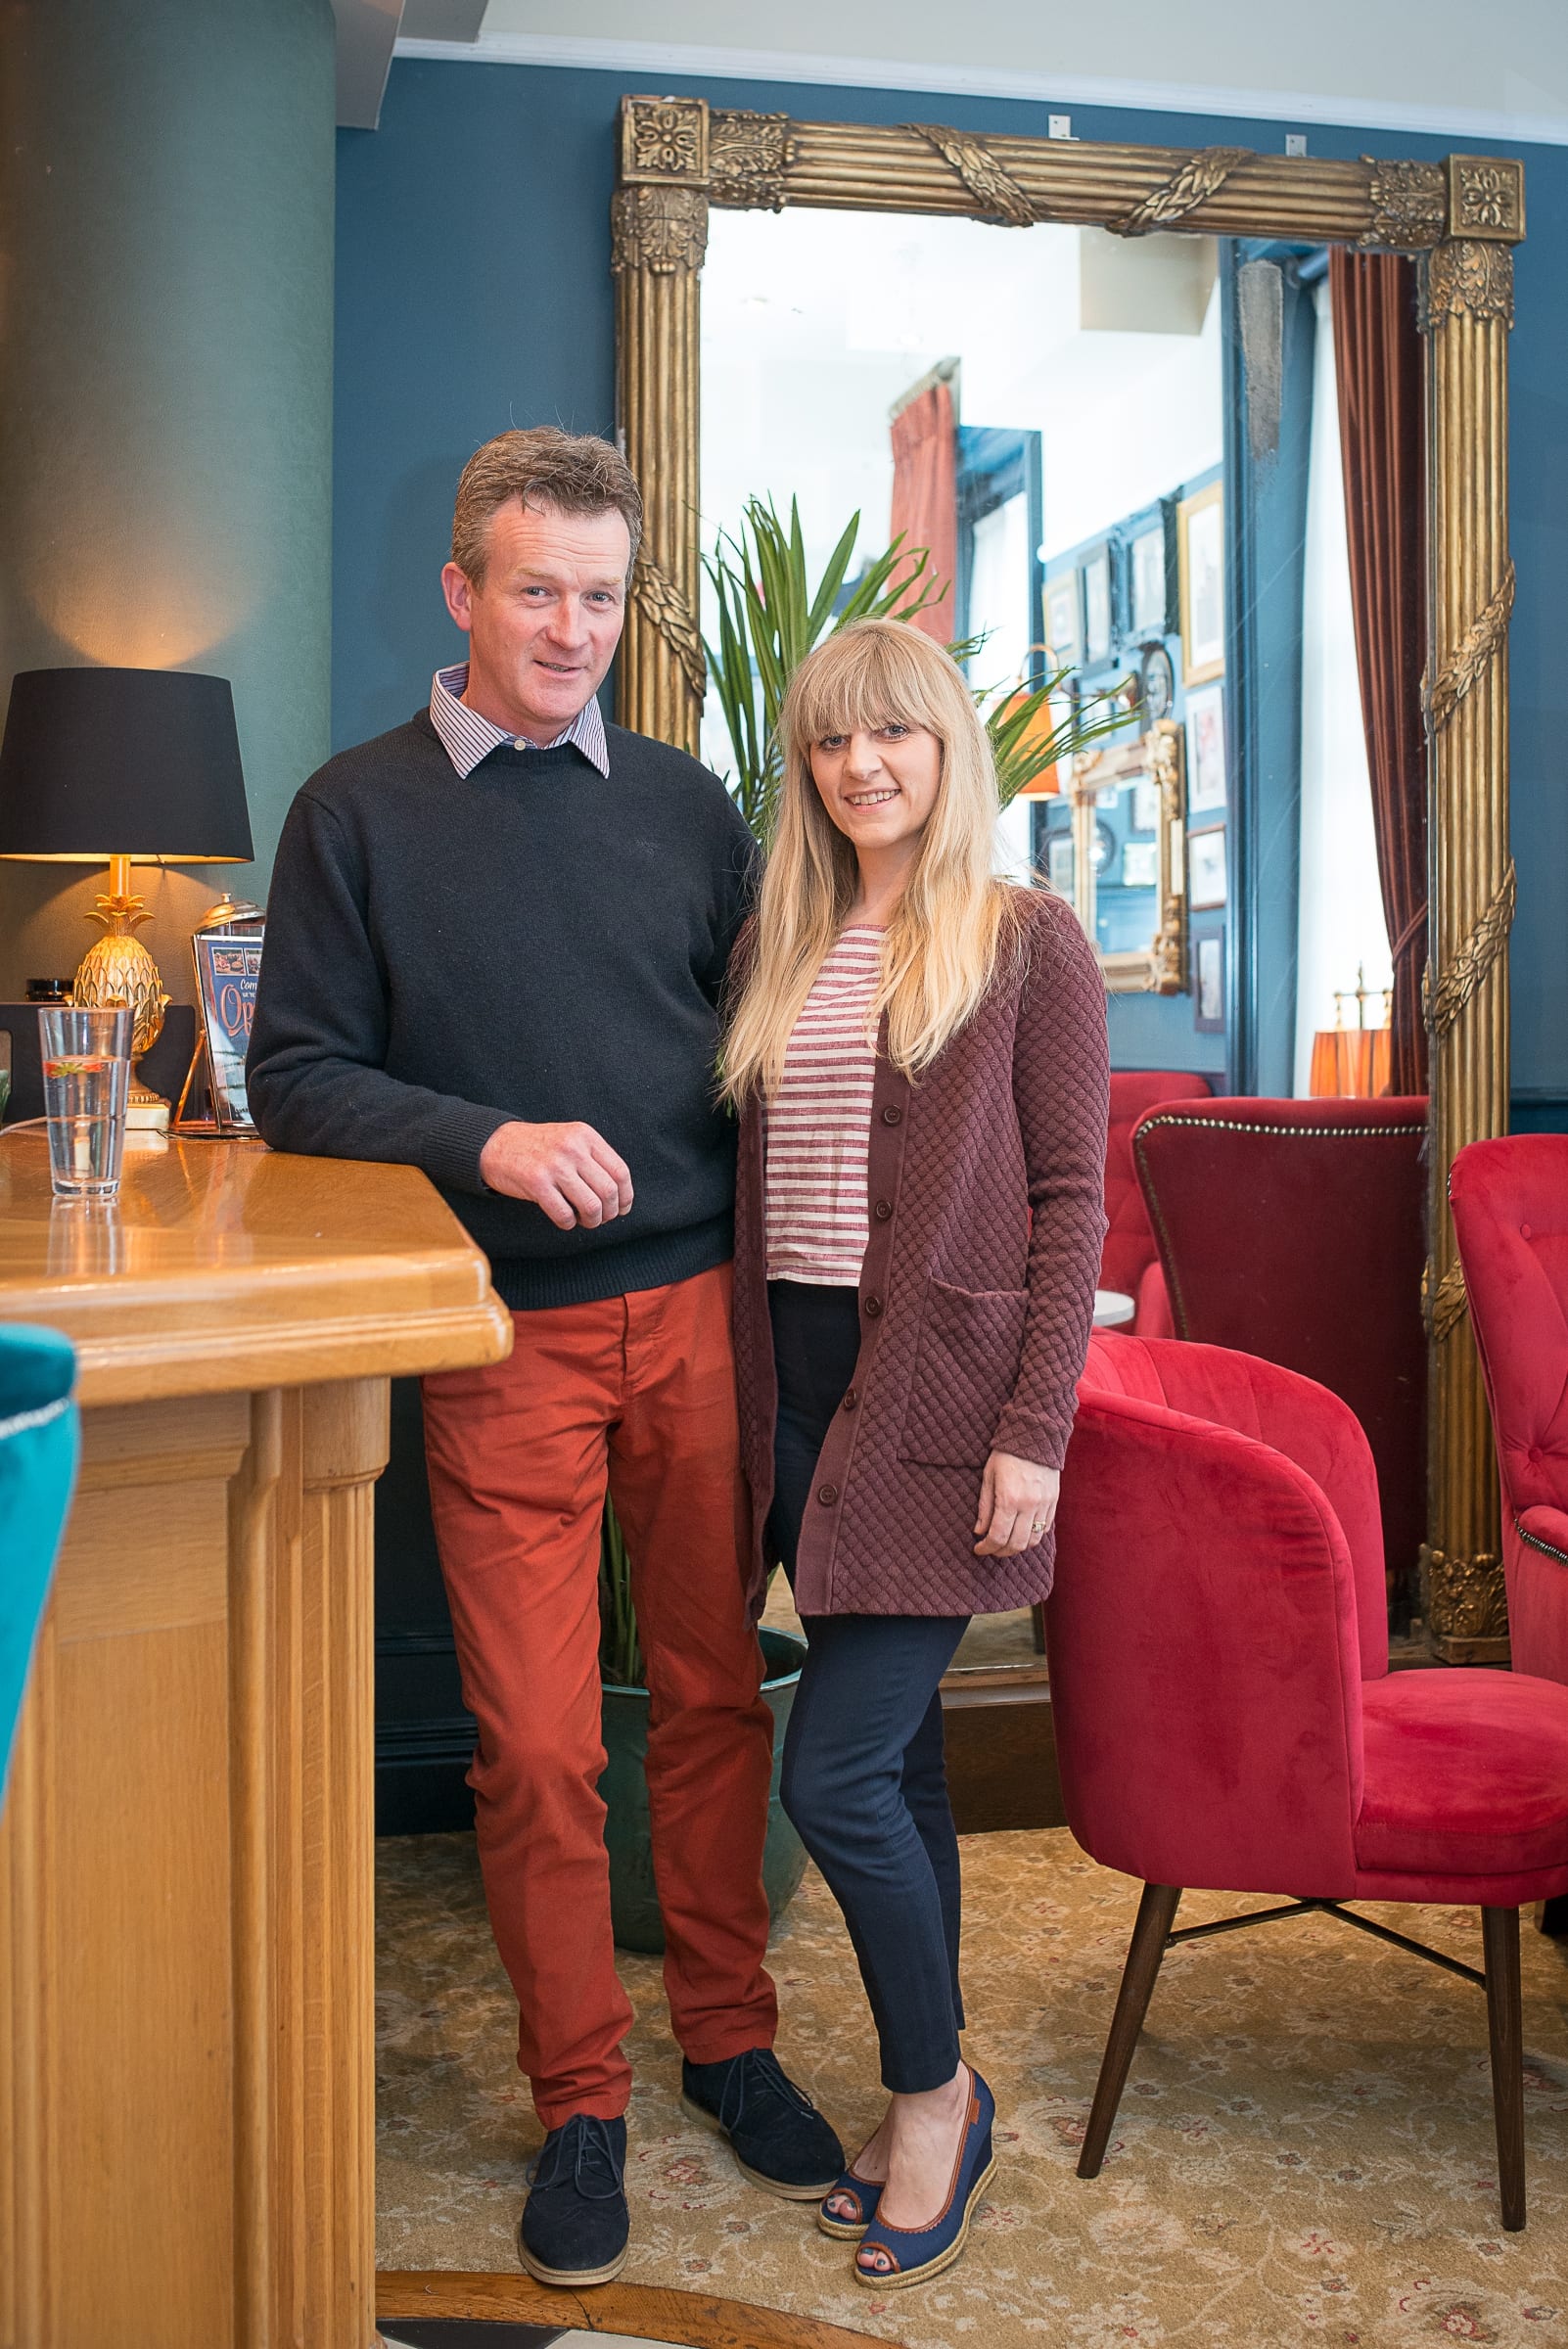 No repro fee: Networking with a Difference held in 101 O’Connell Street. Facilitated by Stephen Pitcher.  23-05-2019, From Left to Right: :William and Lucy Buckley - Will Buckley Production Company
Photo credit Shauna Kennedy